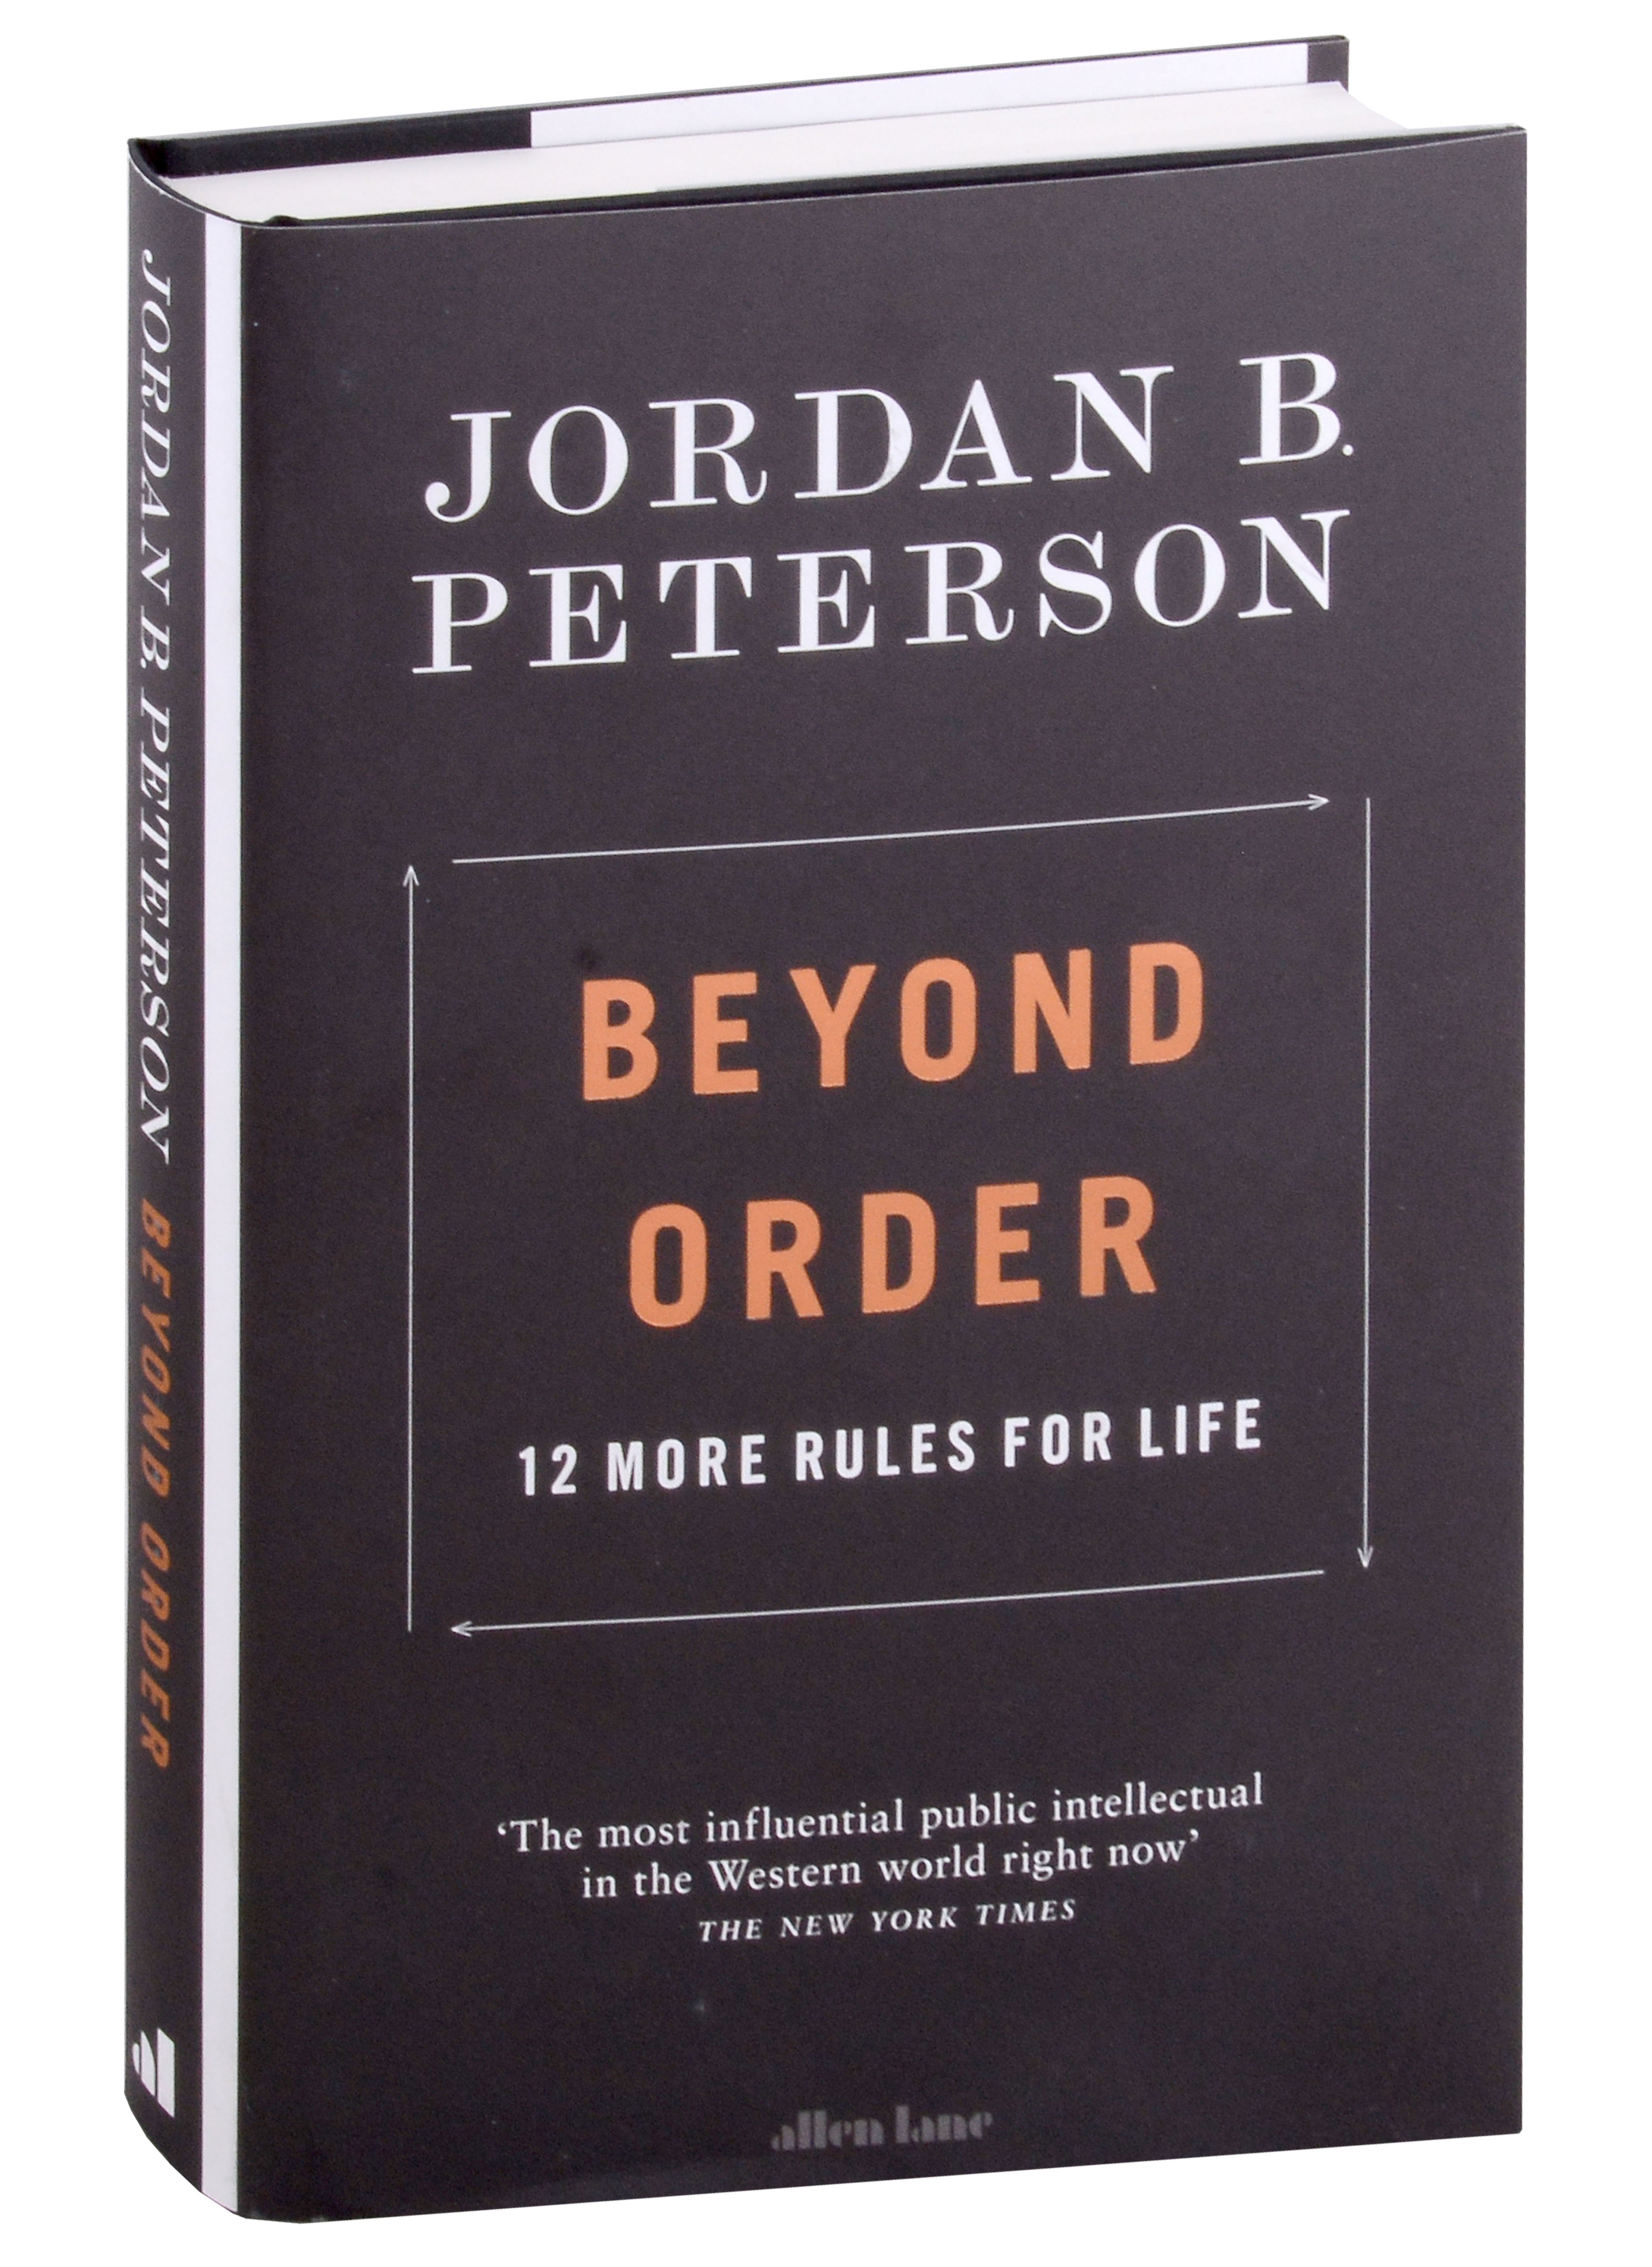 Beyond Order. 12 More Rules for Life